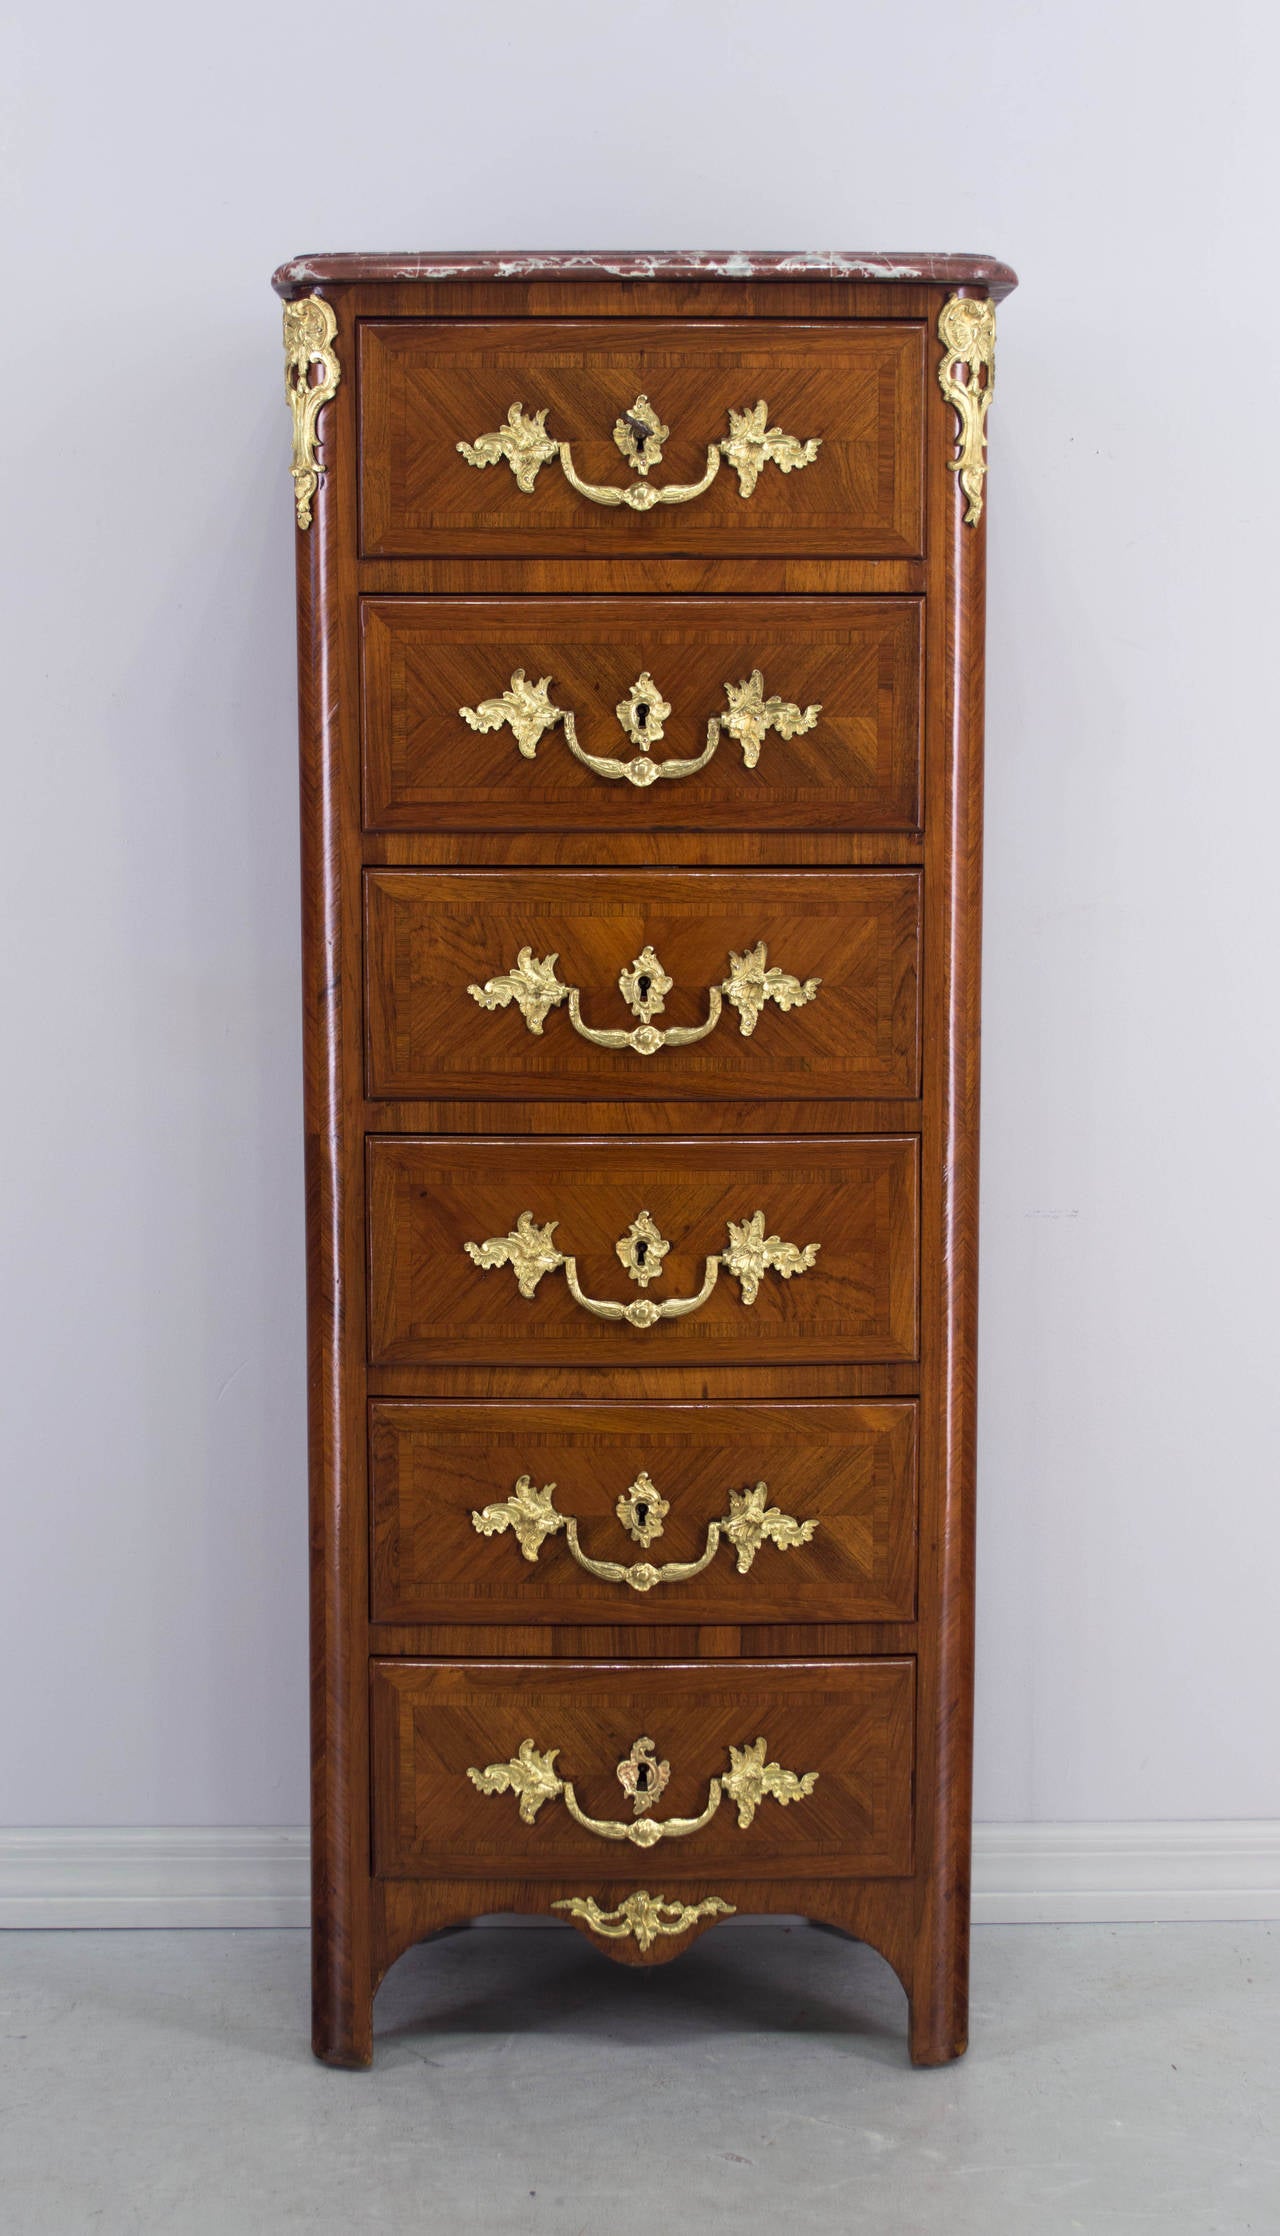 French Regency style tall chest or chiffonier with inlaid veneers of mahogany and tulipwood with oak as a secondary wood. Six dovetailed drawers with original bronze doré hardware. One key for all locks. Rouge royal marble top. French polish